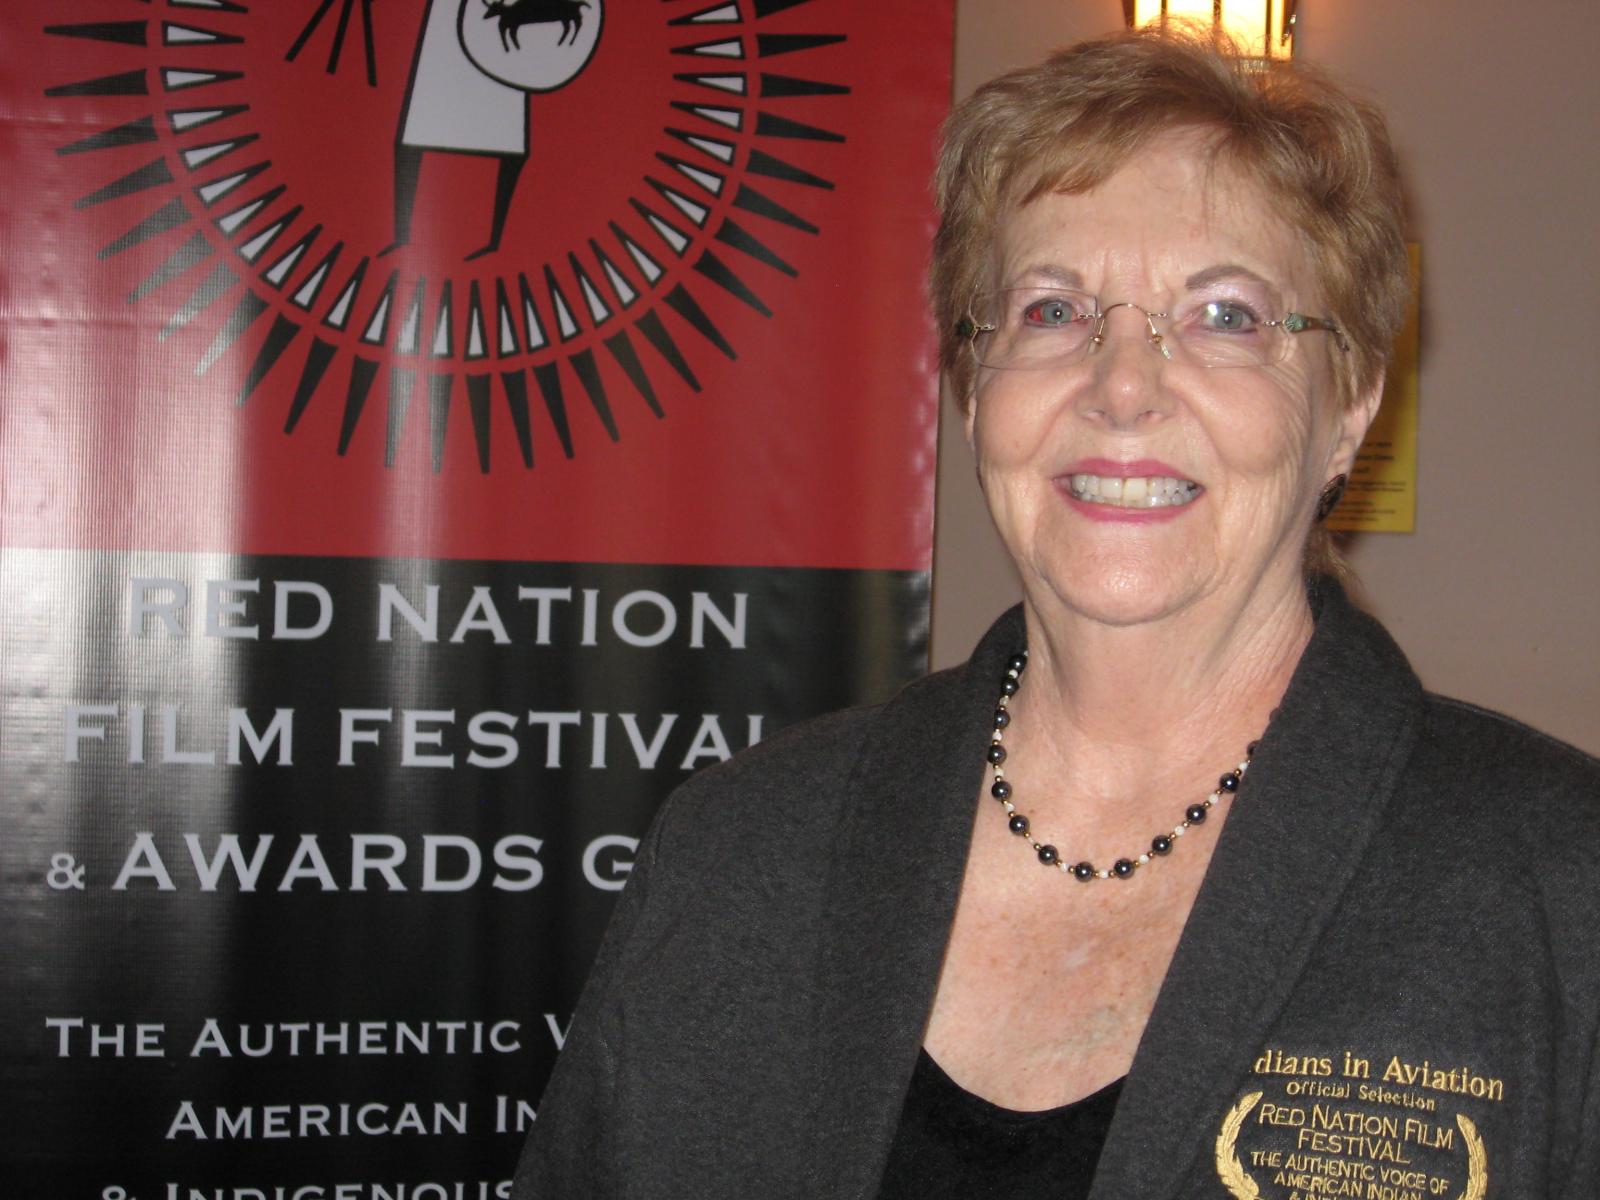 Vernia Roseke at Red Nation Film Festival in Beverly Hills